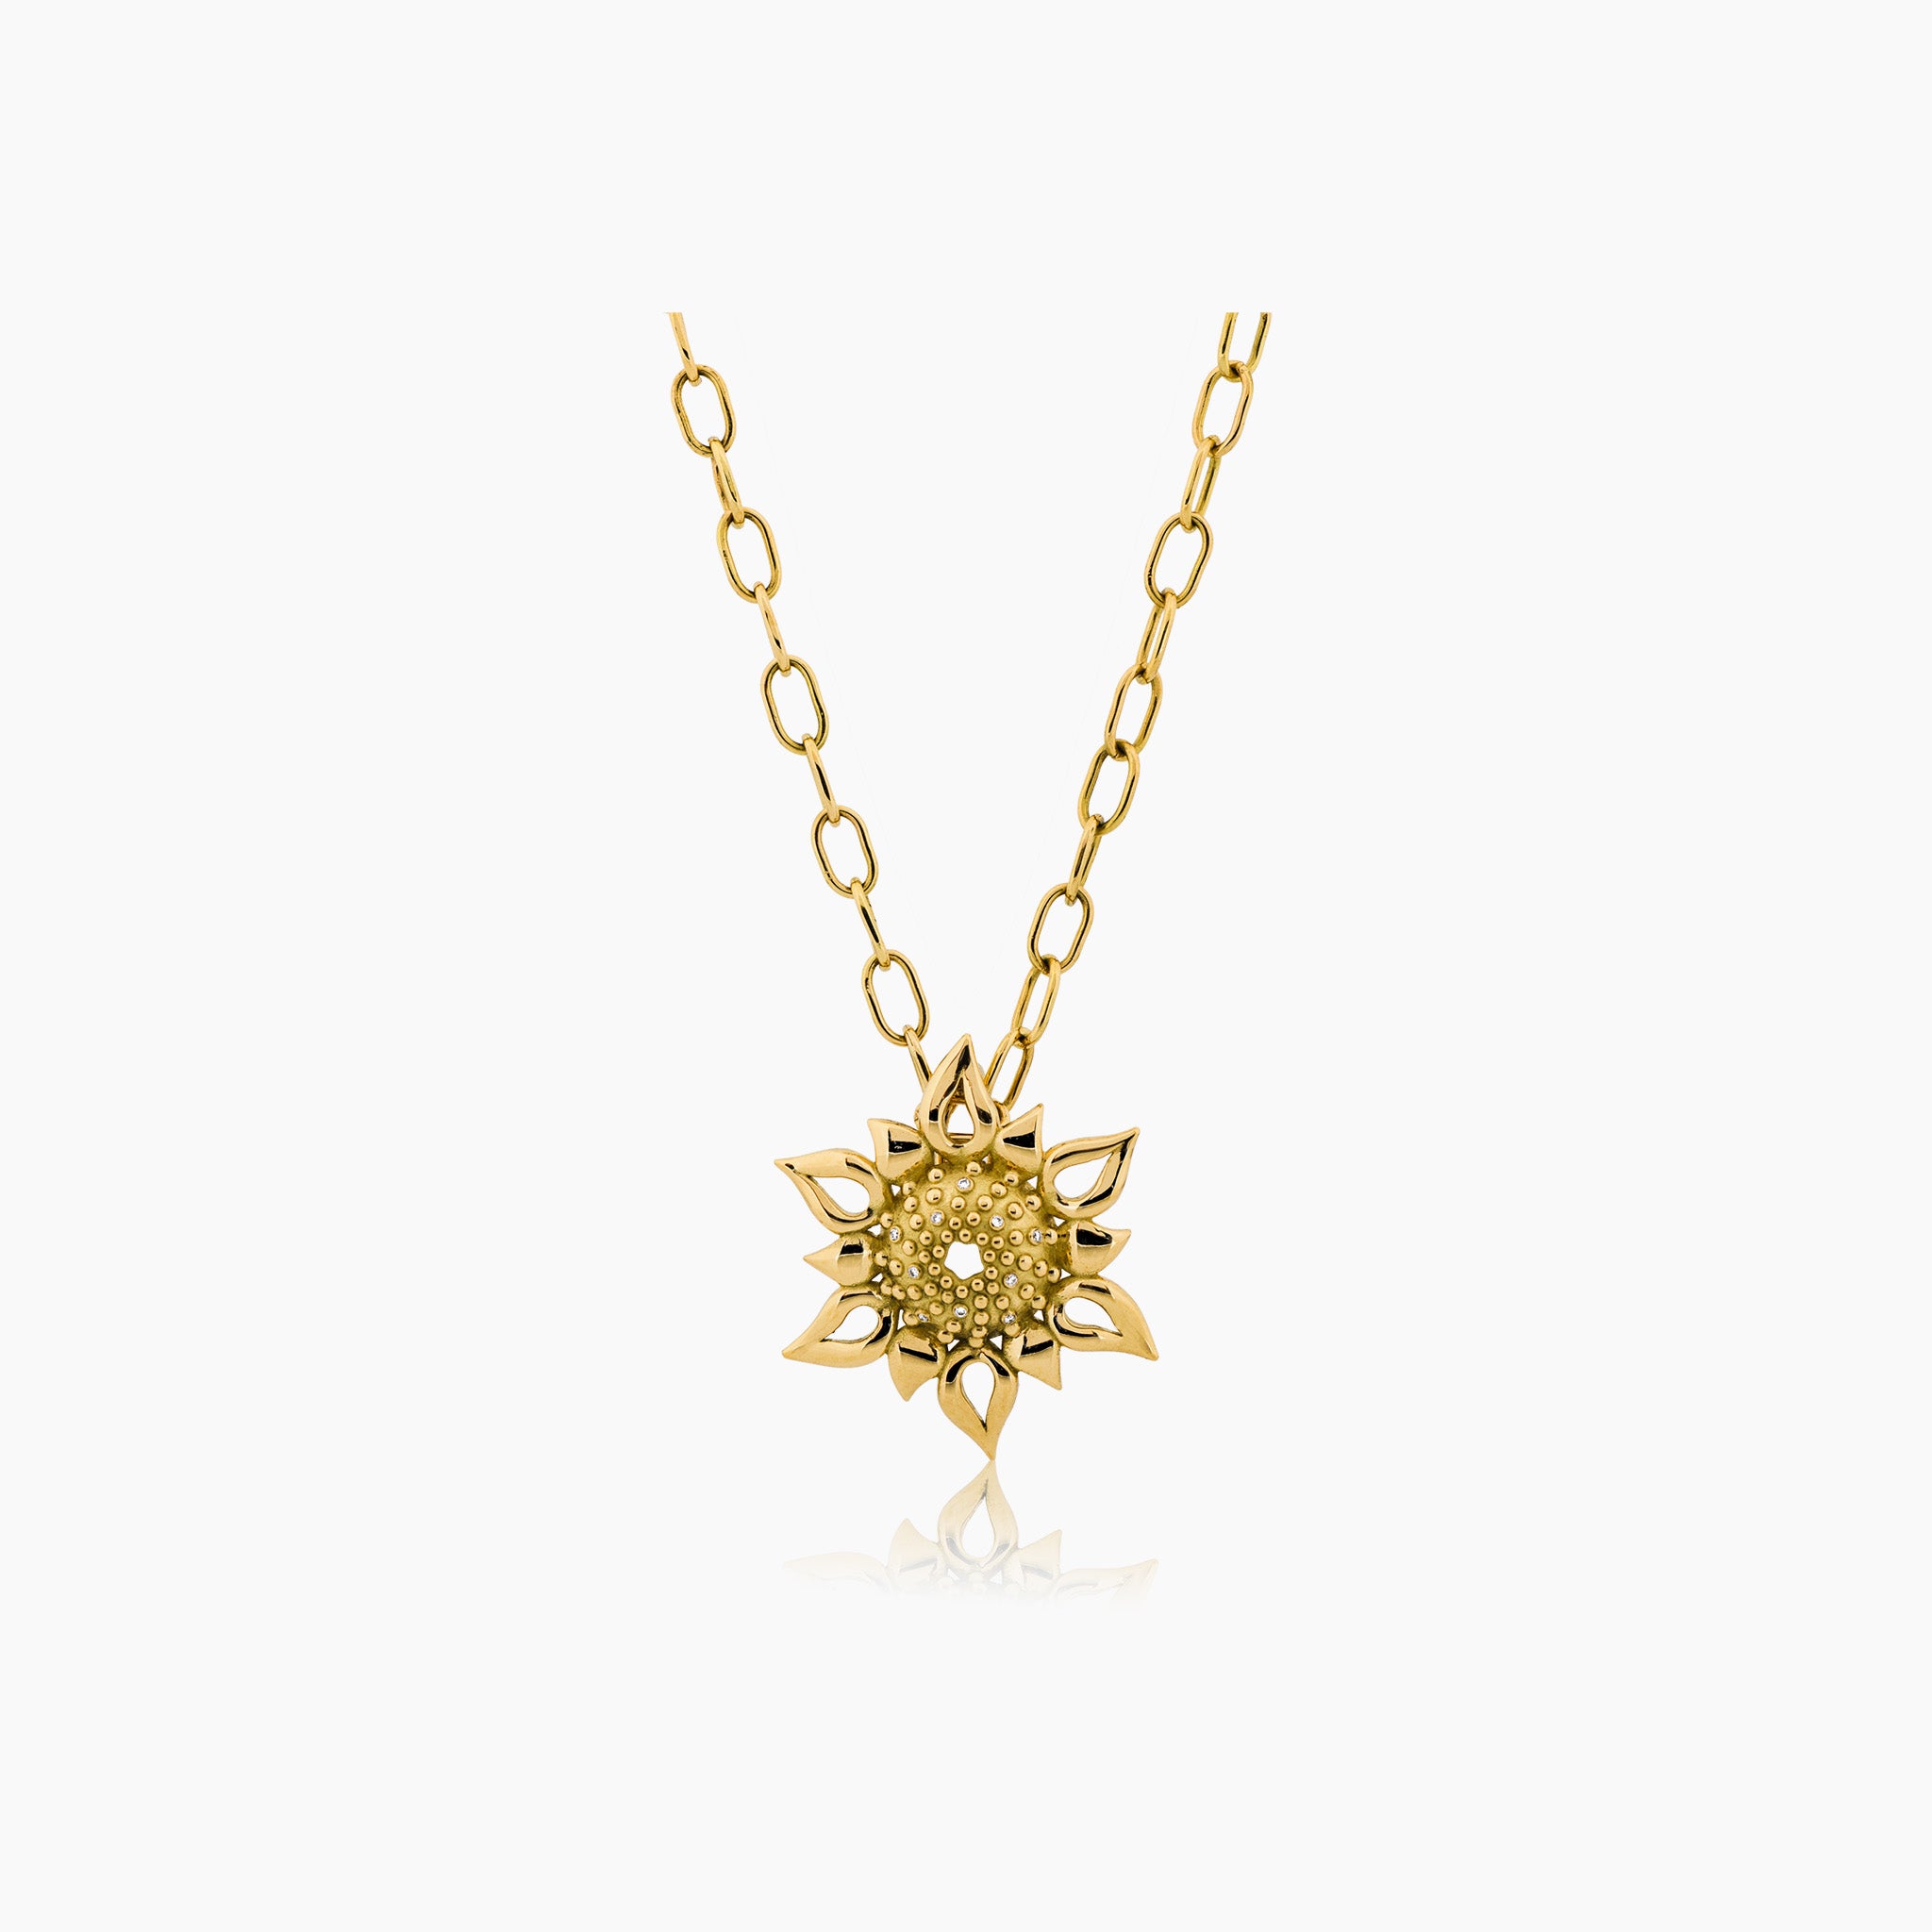 Apollo Echinus Necklace: A radiant pendant with intricate sea urchin-inspired design and sunburst motif on an off-white background.